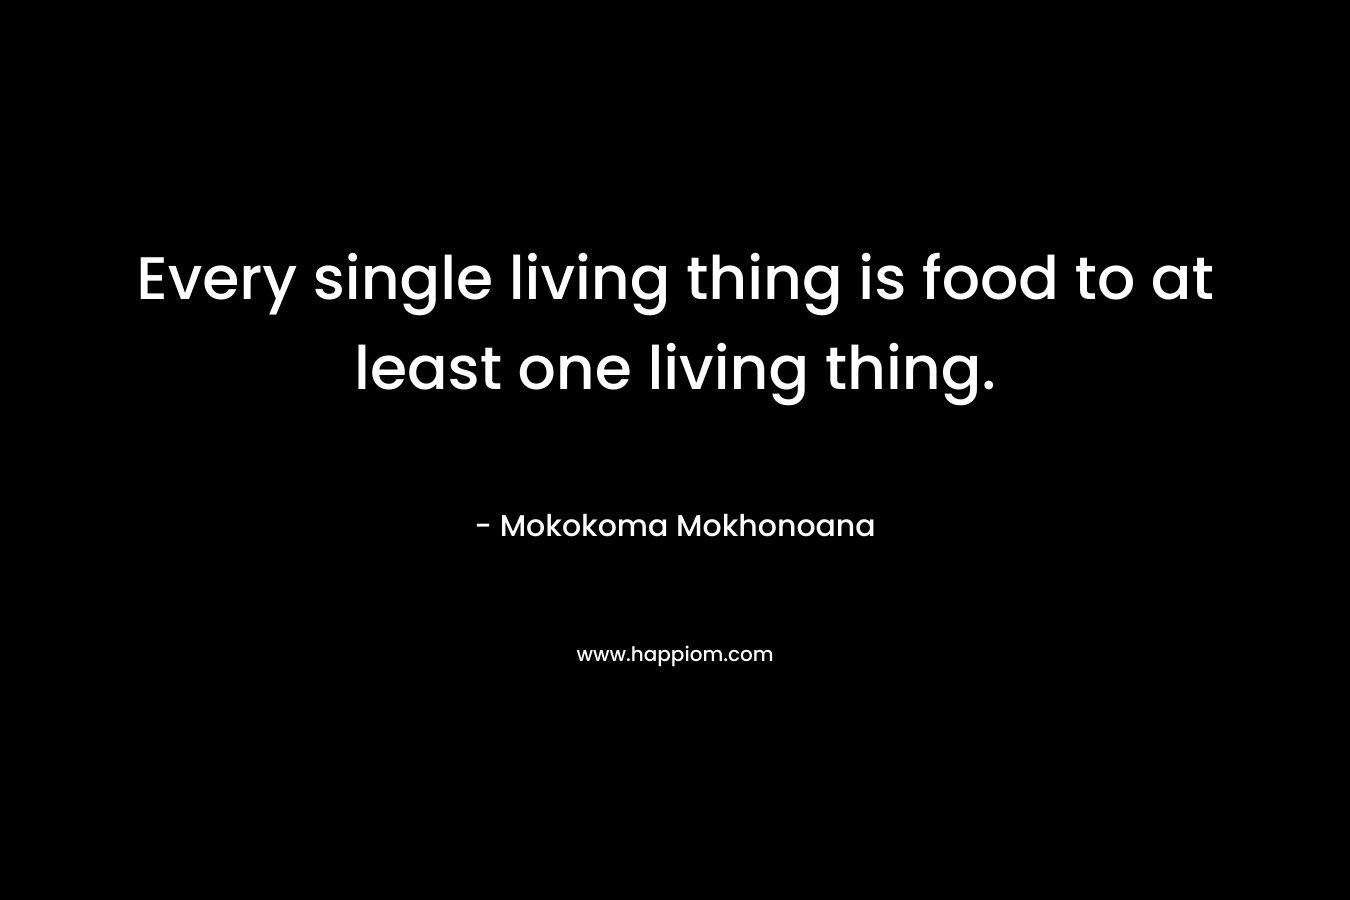 Every single living thing is food to at least one living thing.